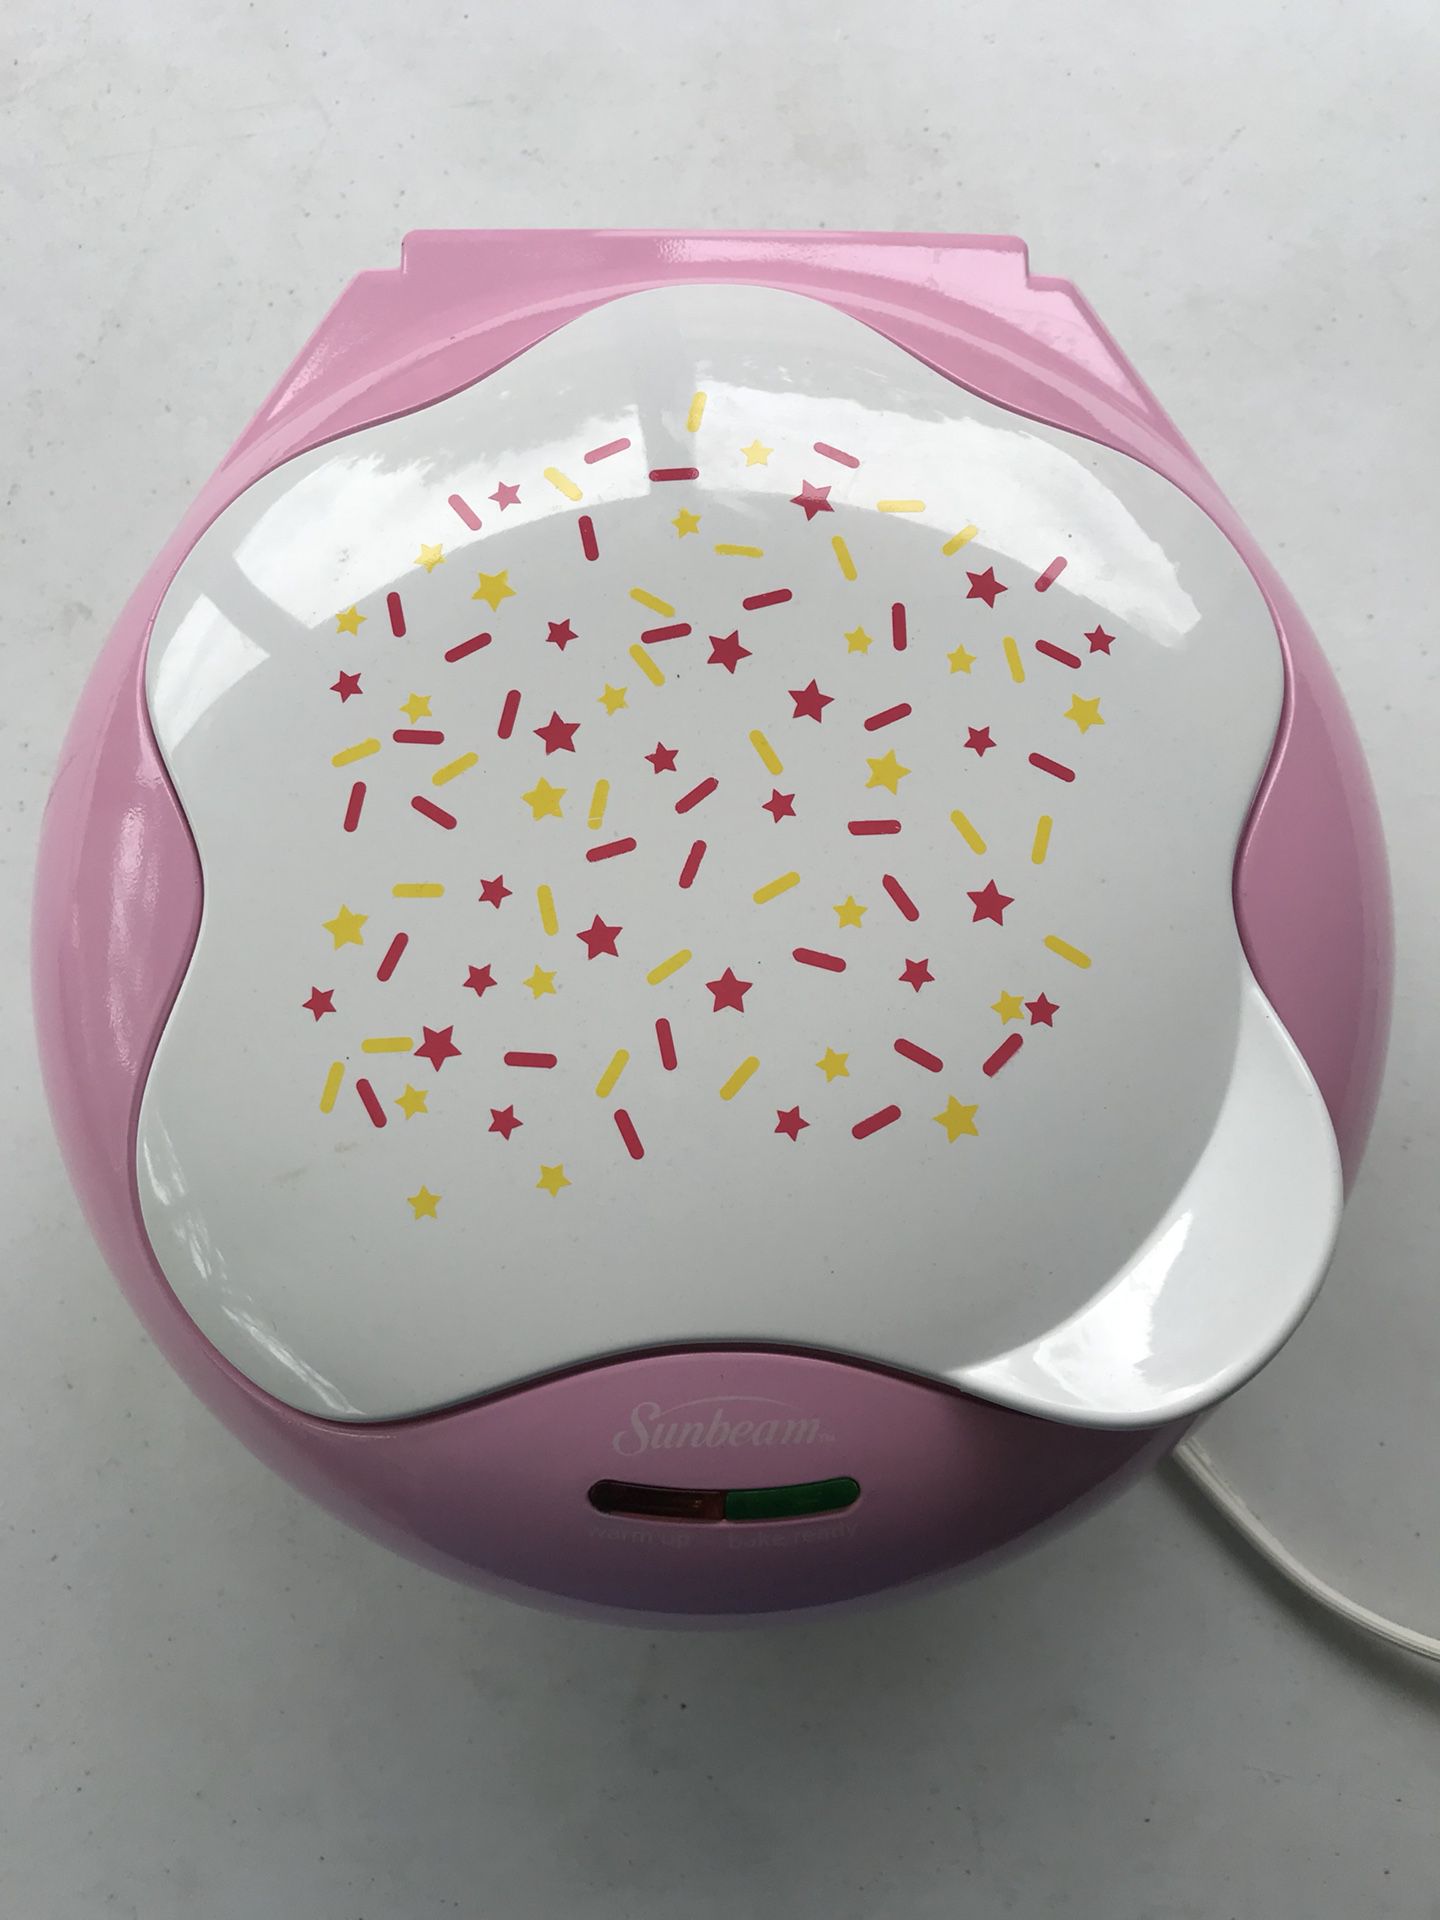 Hello Kitty Rice Cooker, Pancake and Cupcake Maker for Sale in Windermere,  FL - OfferUp